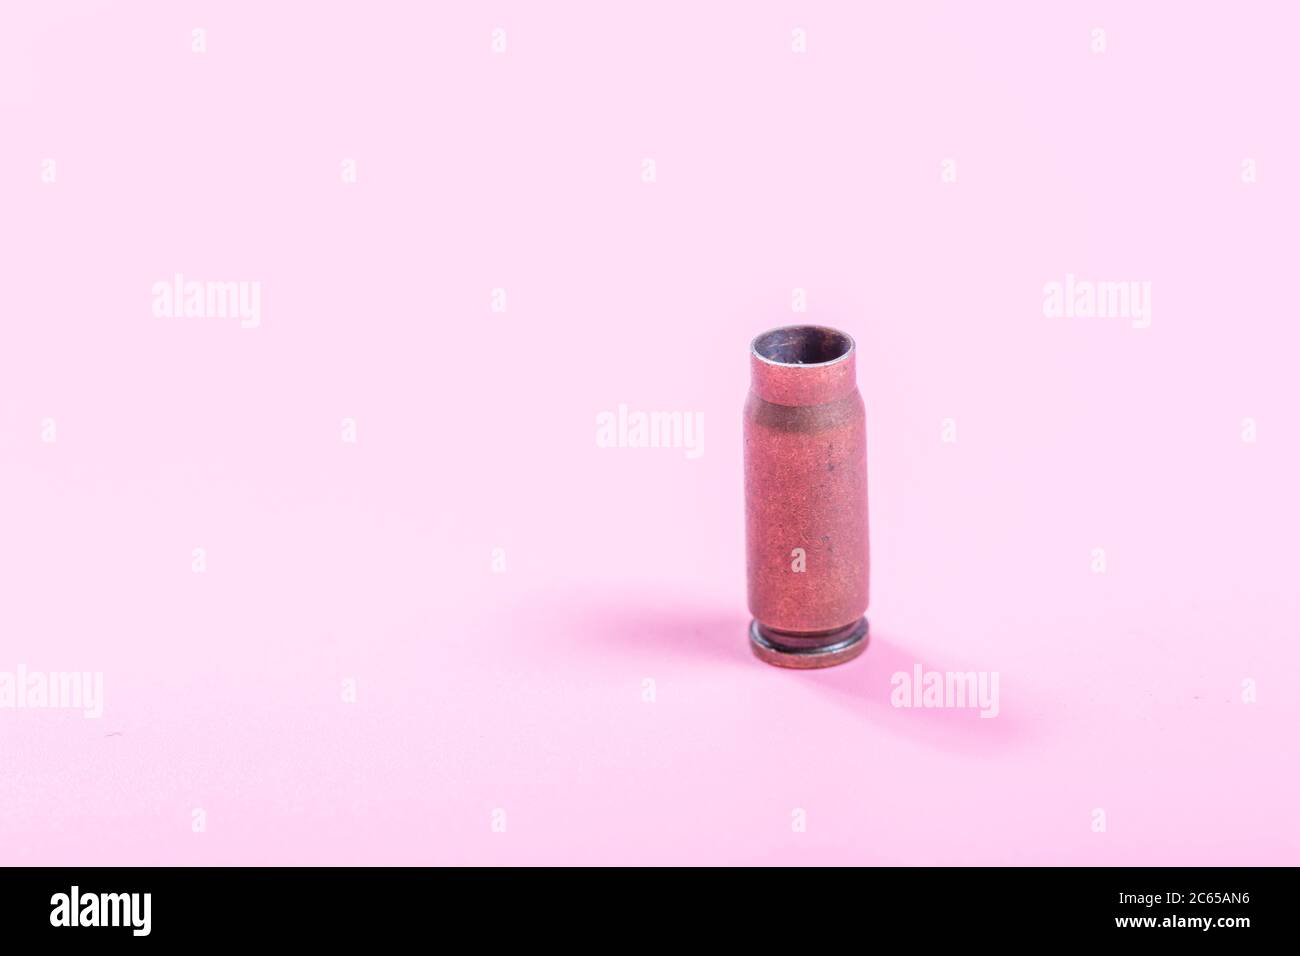 Bullet shell with pink background Stock Photo